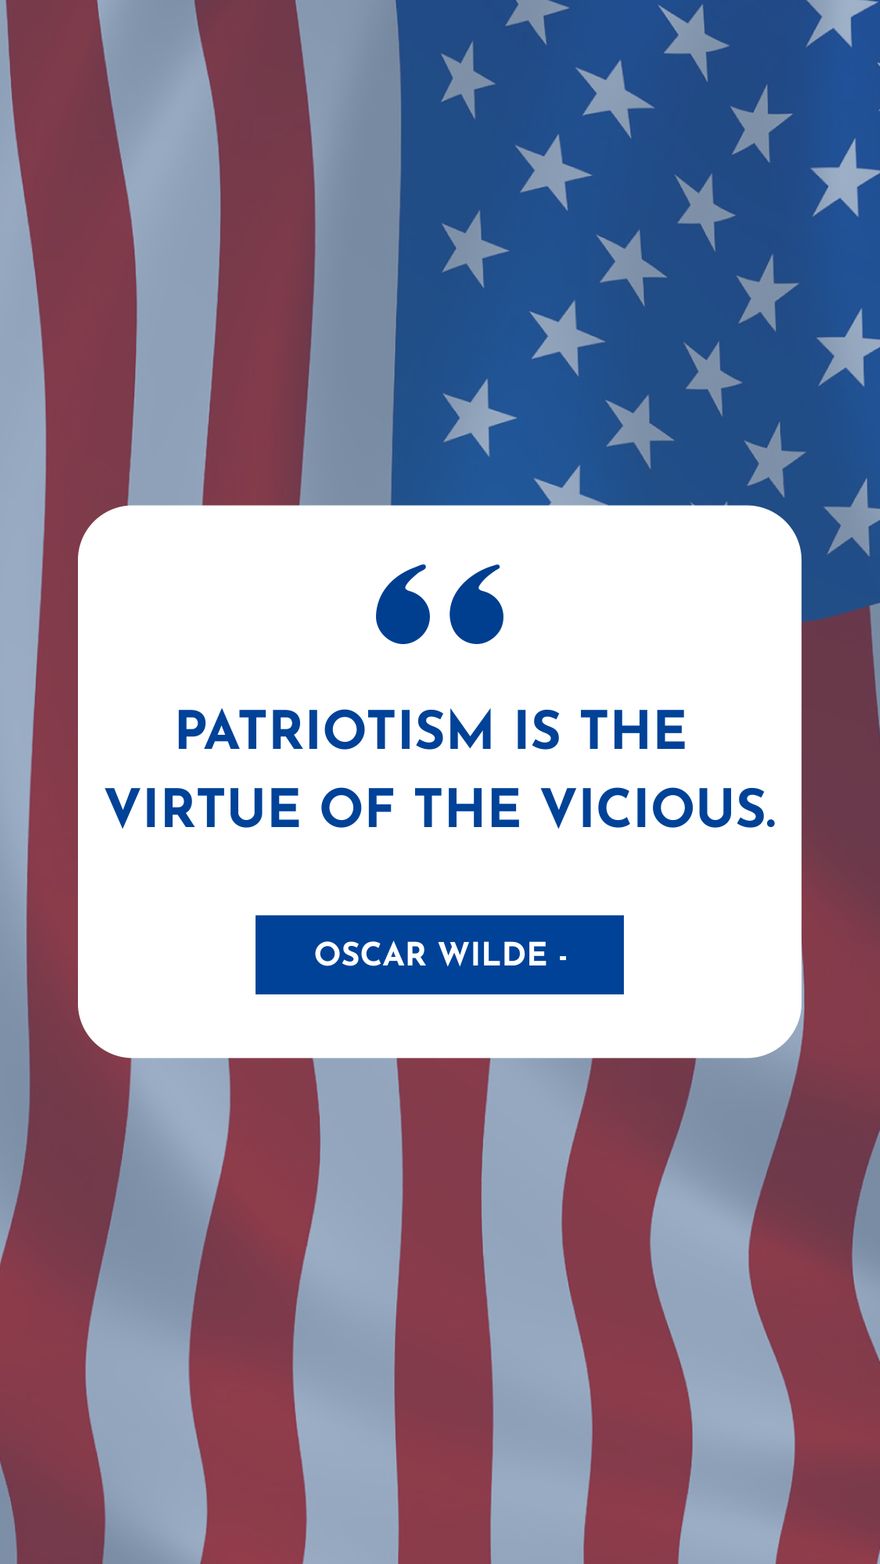 Oscar Wilde - Patriotism is the virtue of the vicious.